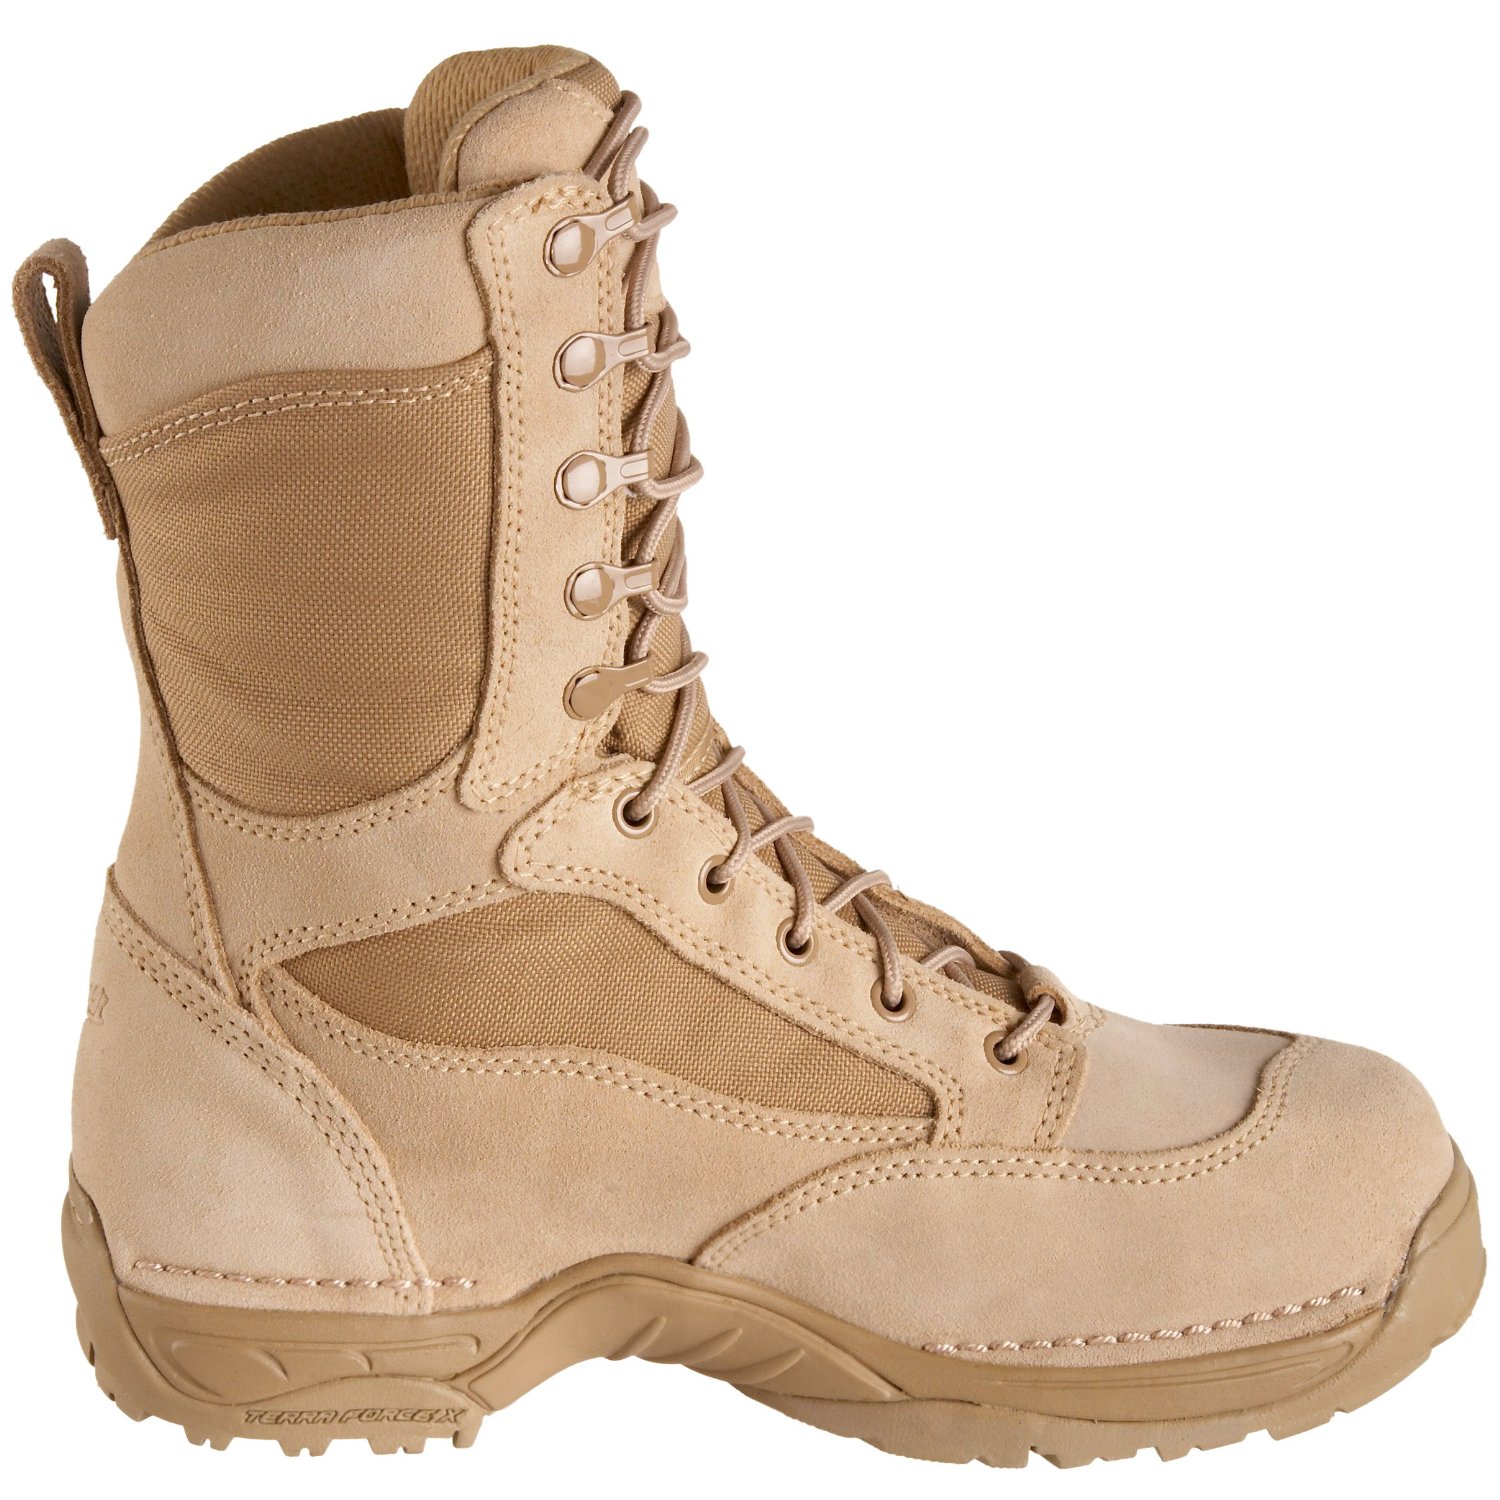 clipart of military boots - photo #47